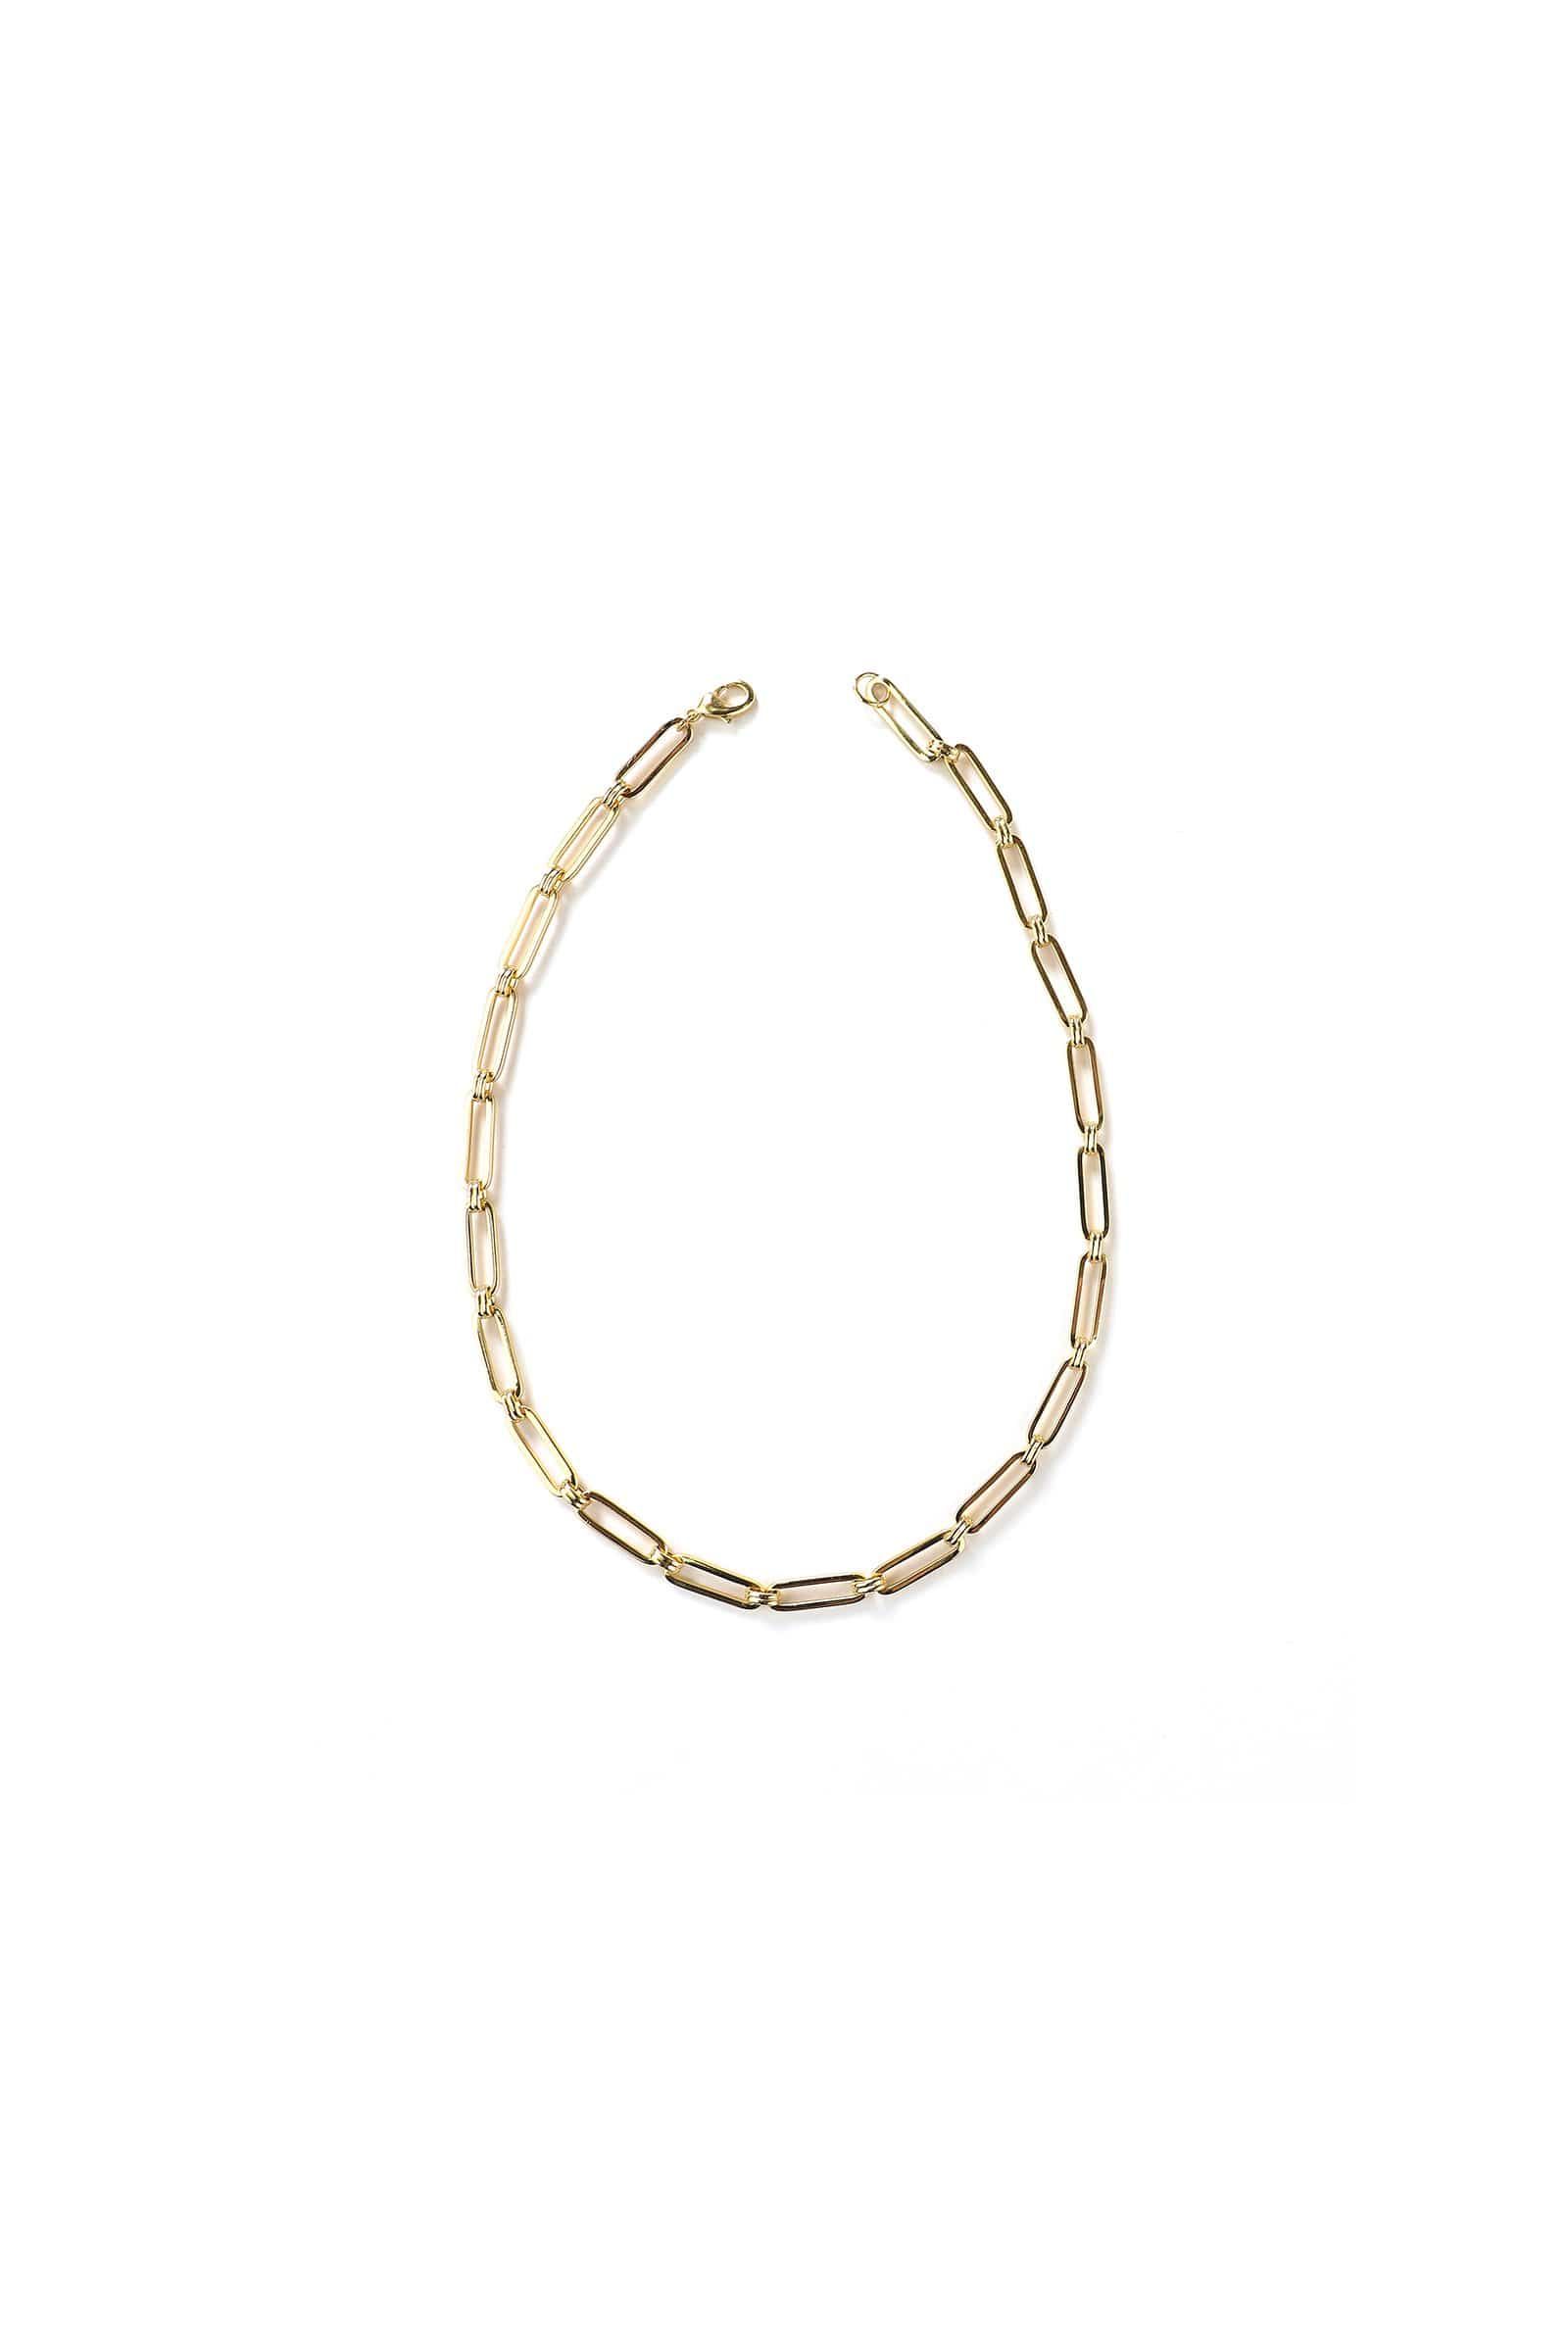 Ruta Gold Chain Link Necklace | J.ING